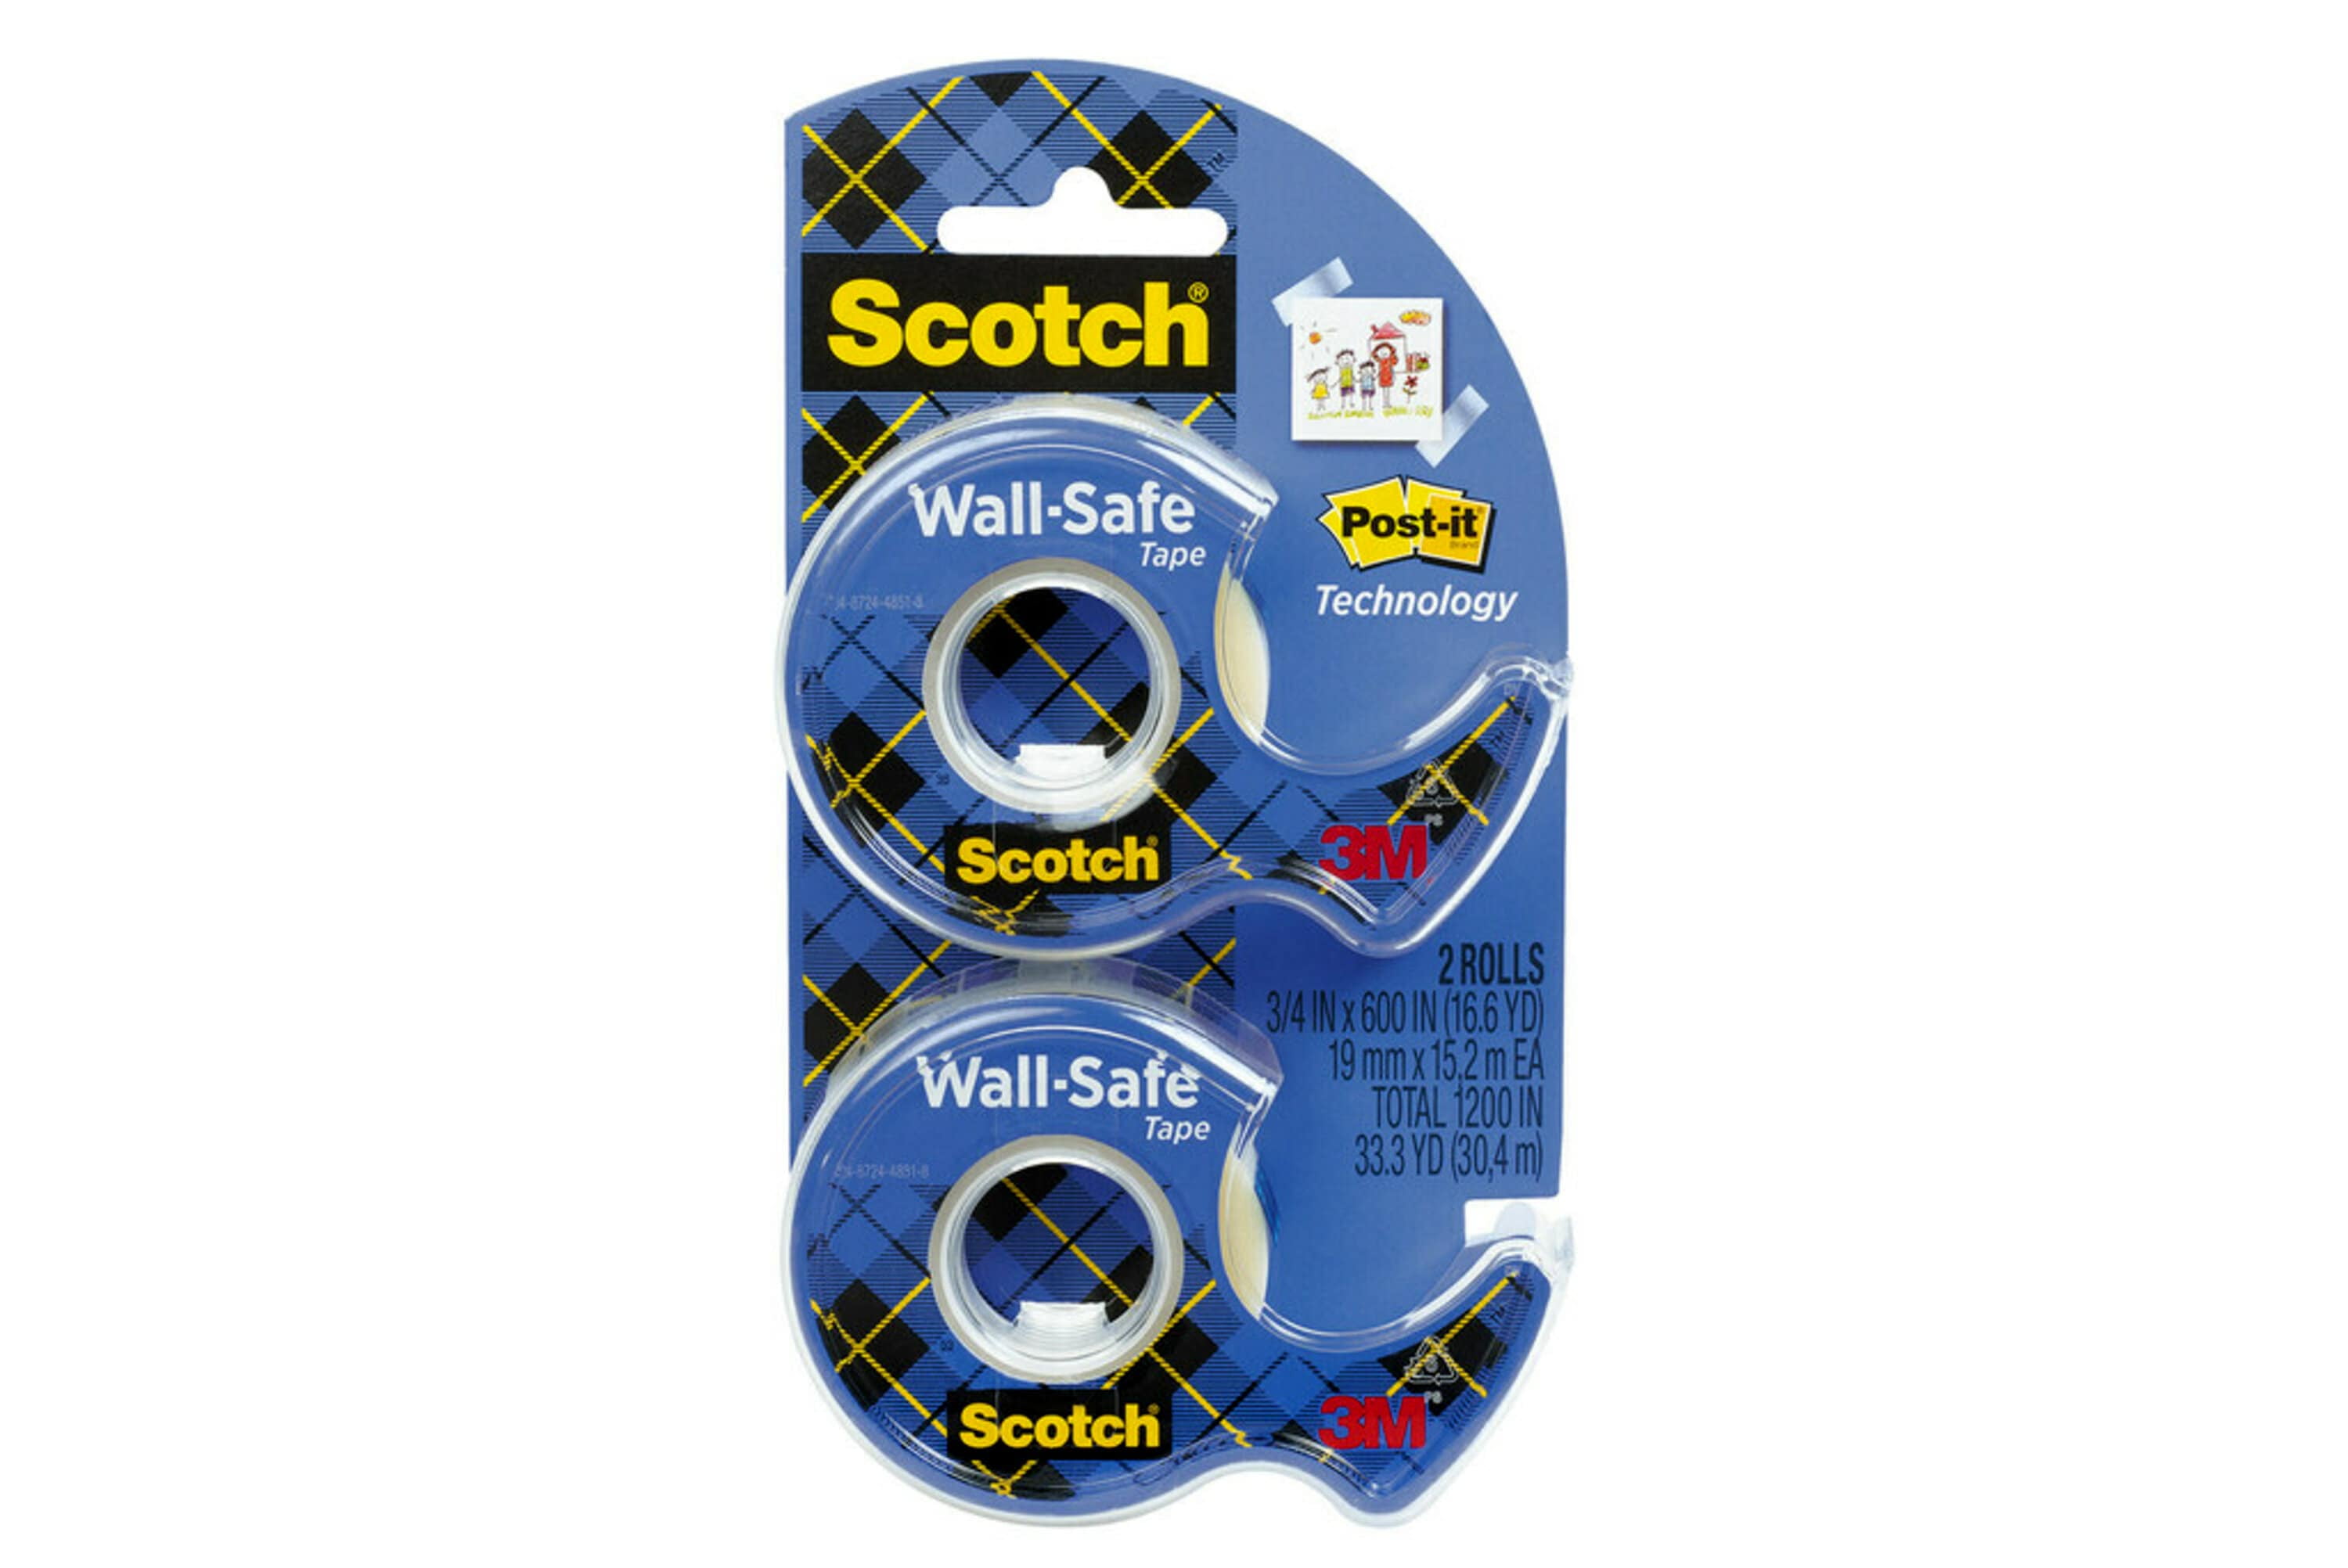 Sticks Securely Photo Safe Designed for Displaying 2 Dispensered Rolls Scotch Wall-Safe Tape Invisible 183-DM2 - 1 3/4 in x 600 in Removes Cleanly 